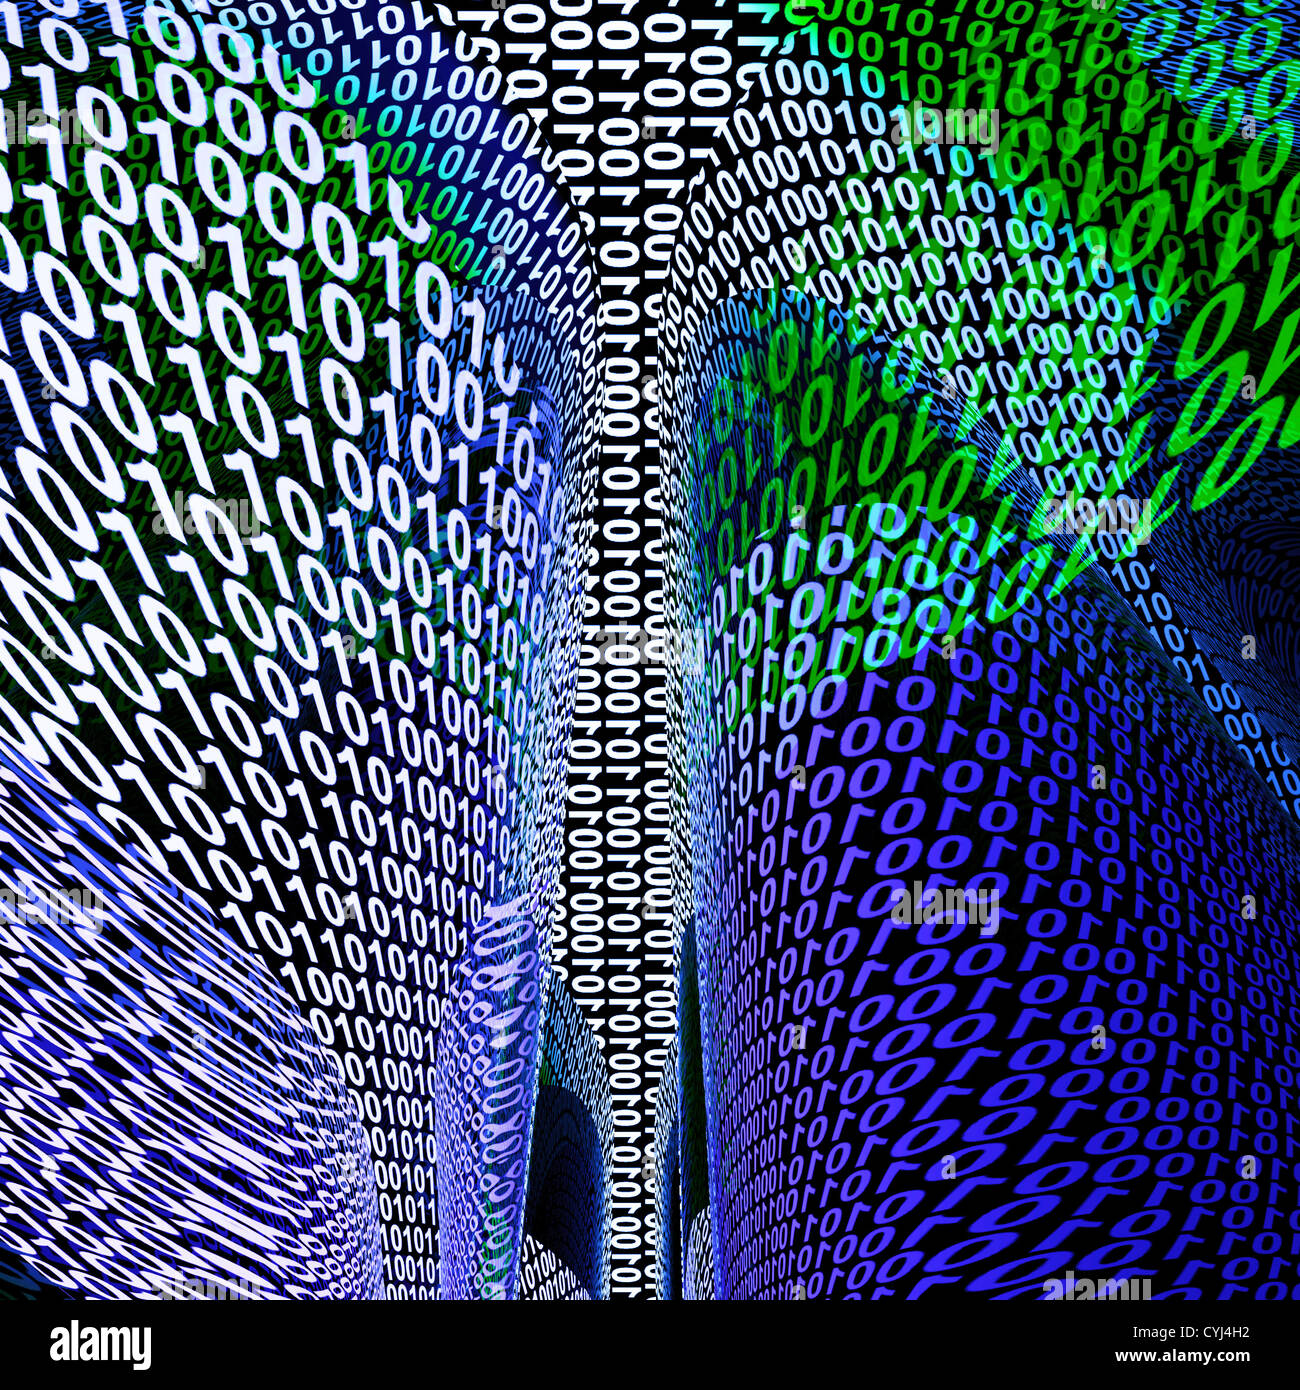 Abstract Binary Codes Background Showing Technology And Computer Data Stock Photo